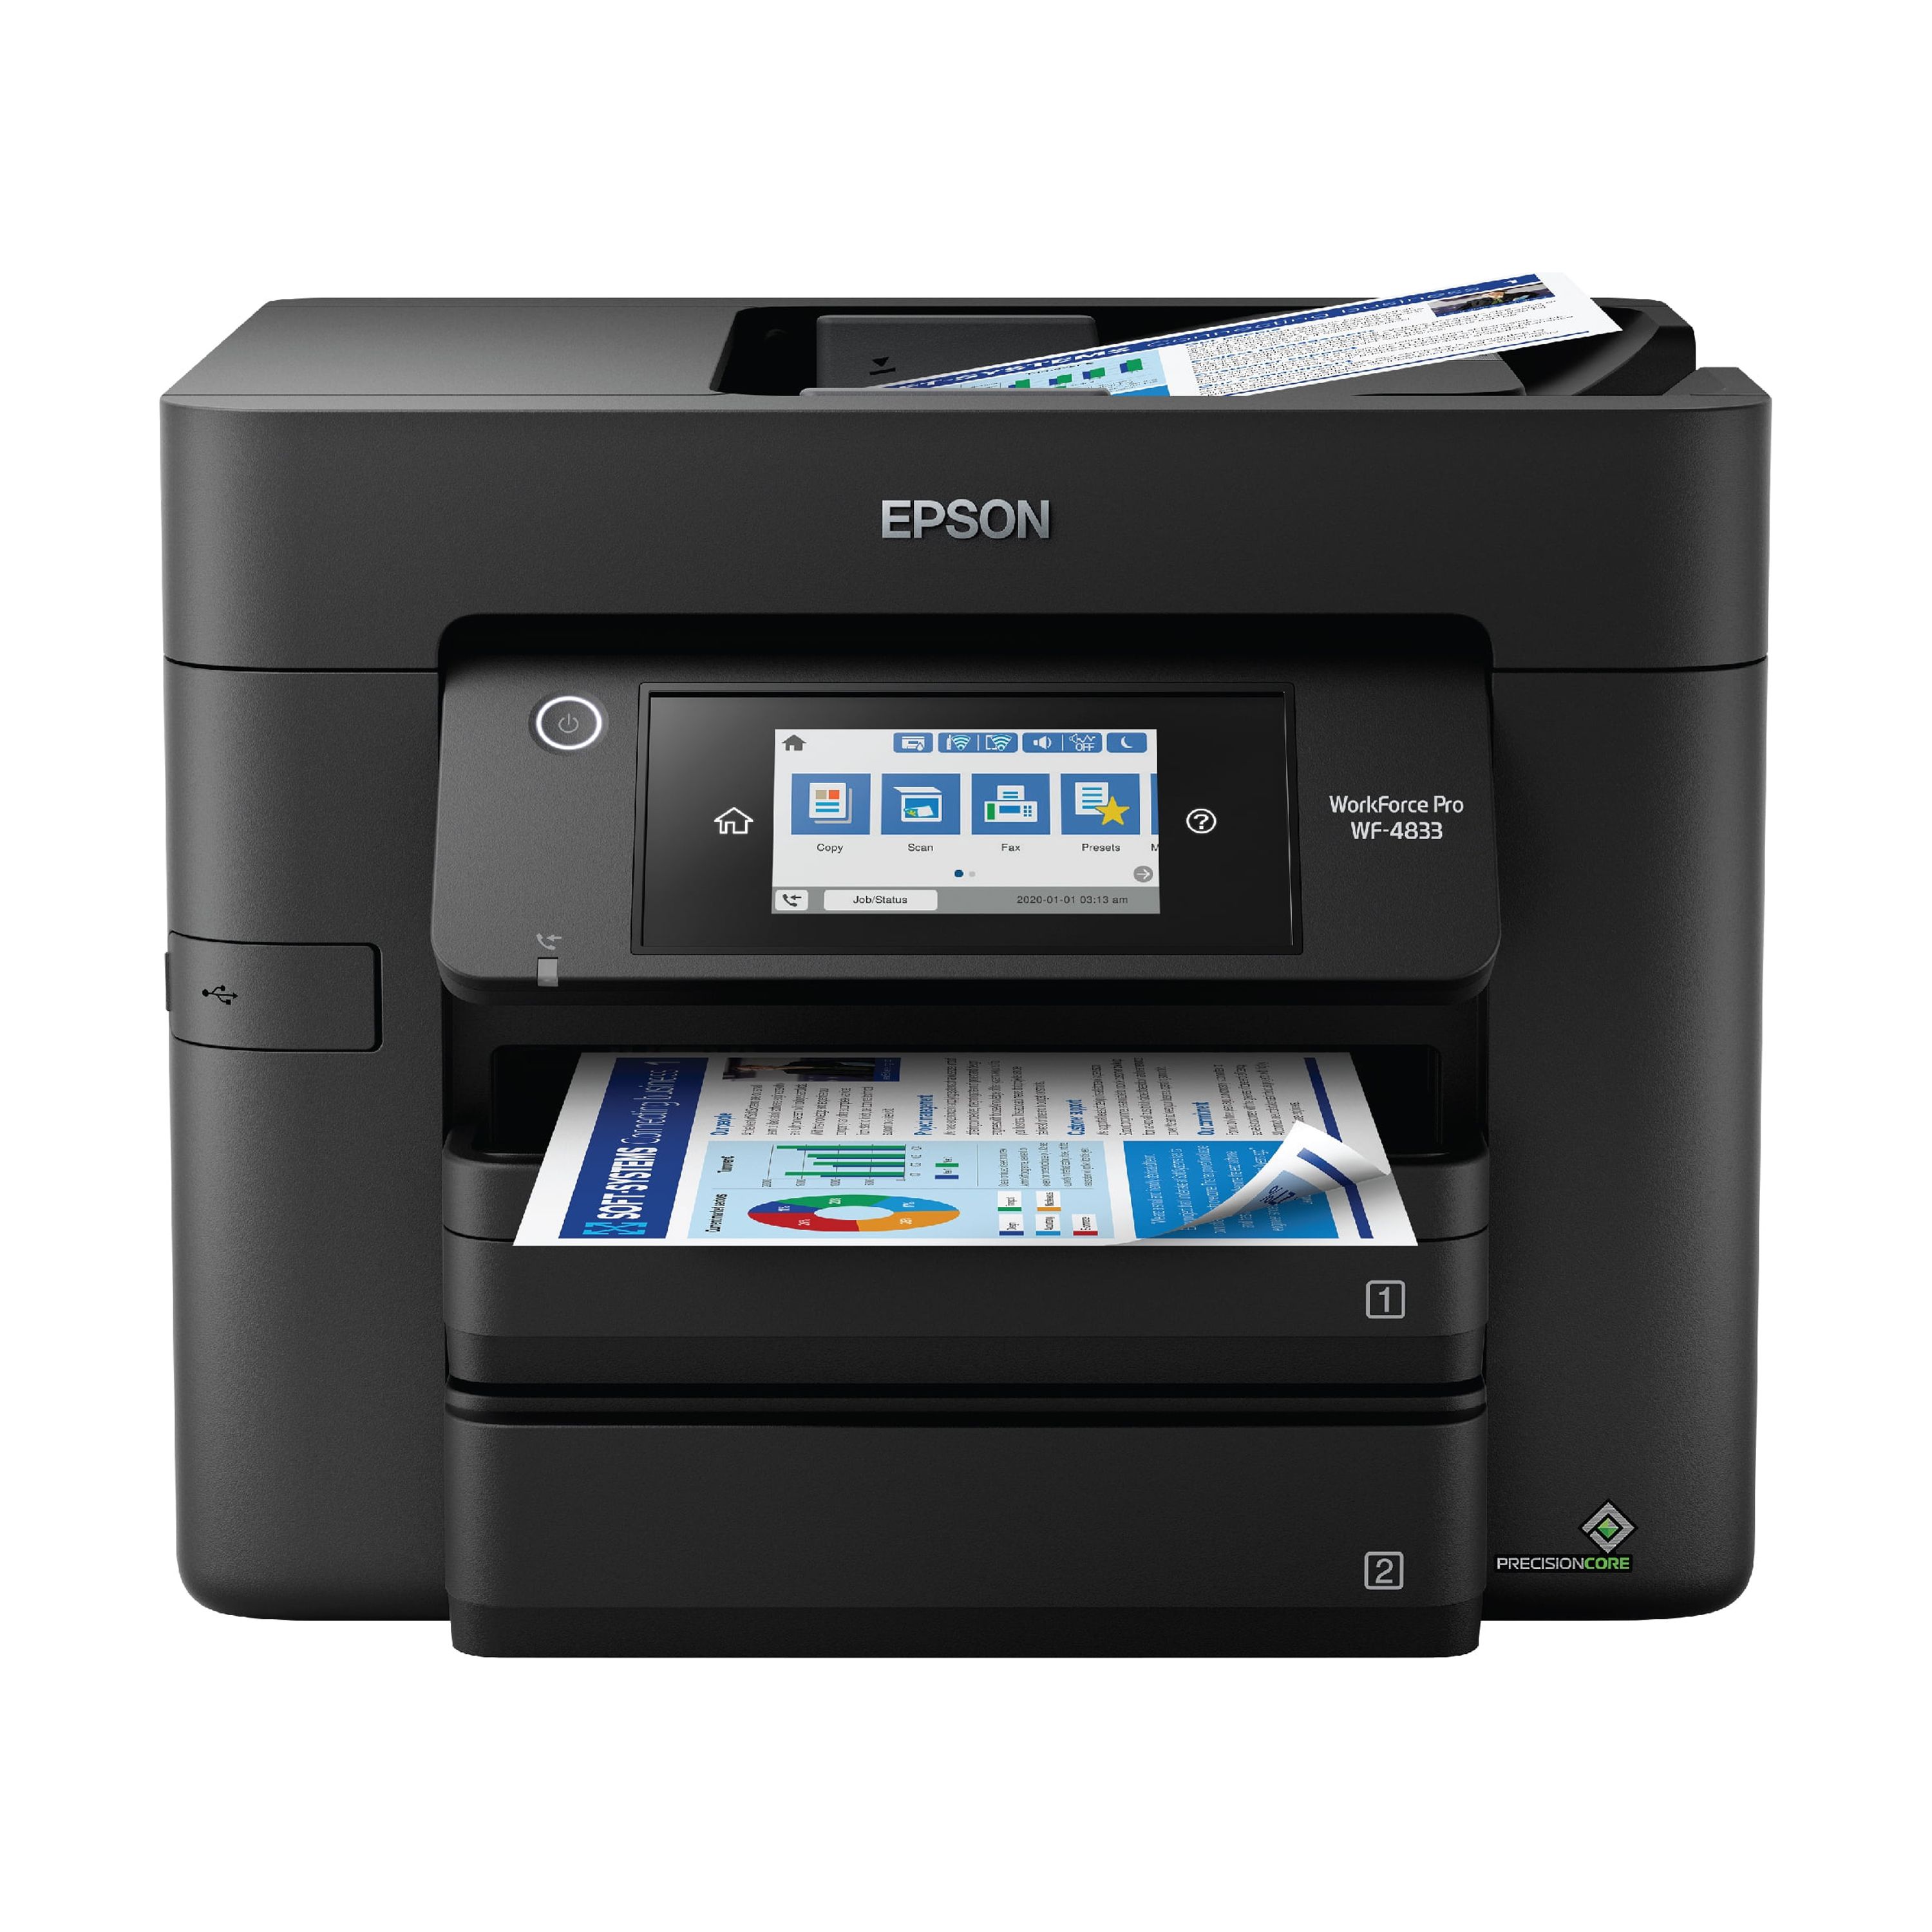 Epson WorkForce Pro WF-4833 Wireless All-in-One Printer with Auto 2-Sided Print, Copy, Scan and Fax, 50-Page ADF, 500-Sheet Paper Capacity, and 4.3" Color Touchscreen - image 1 of 5